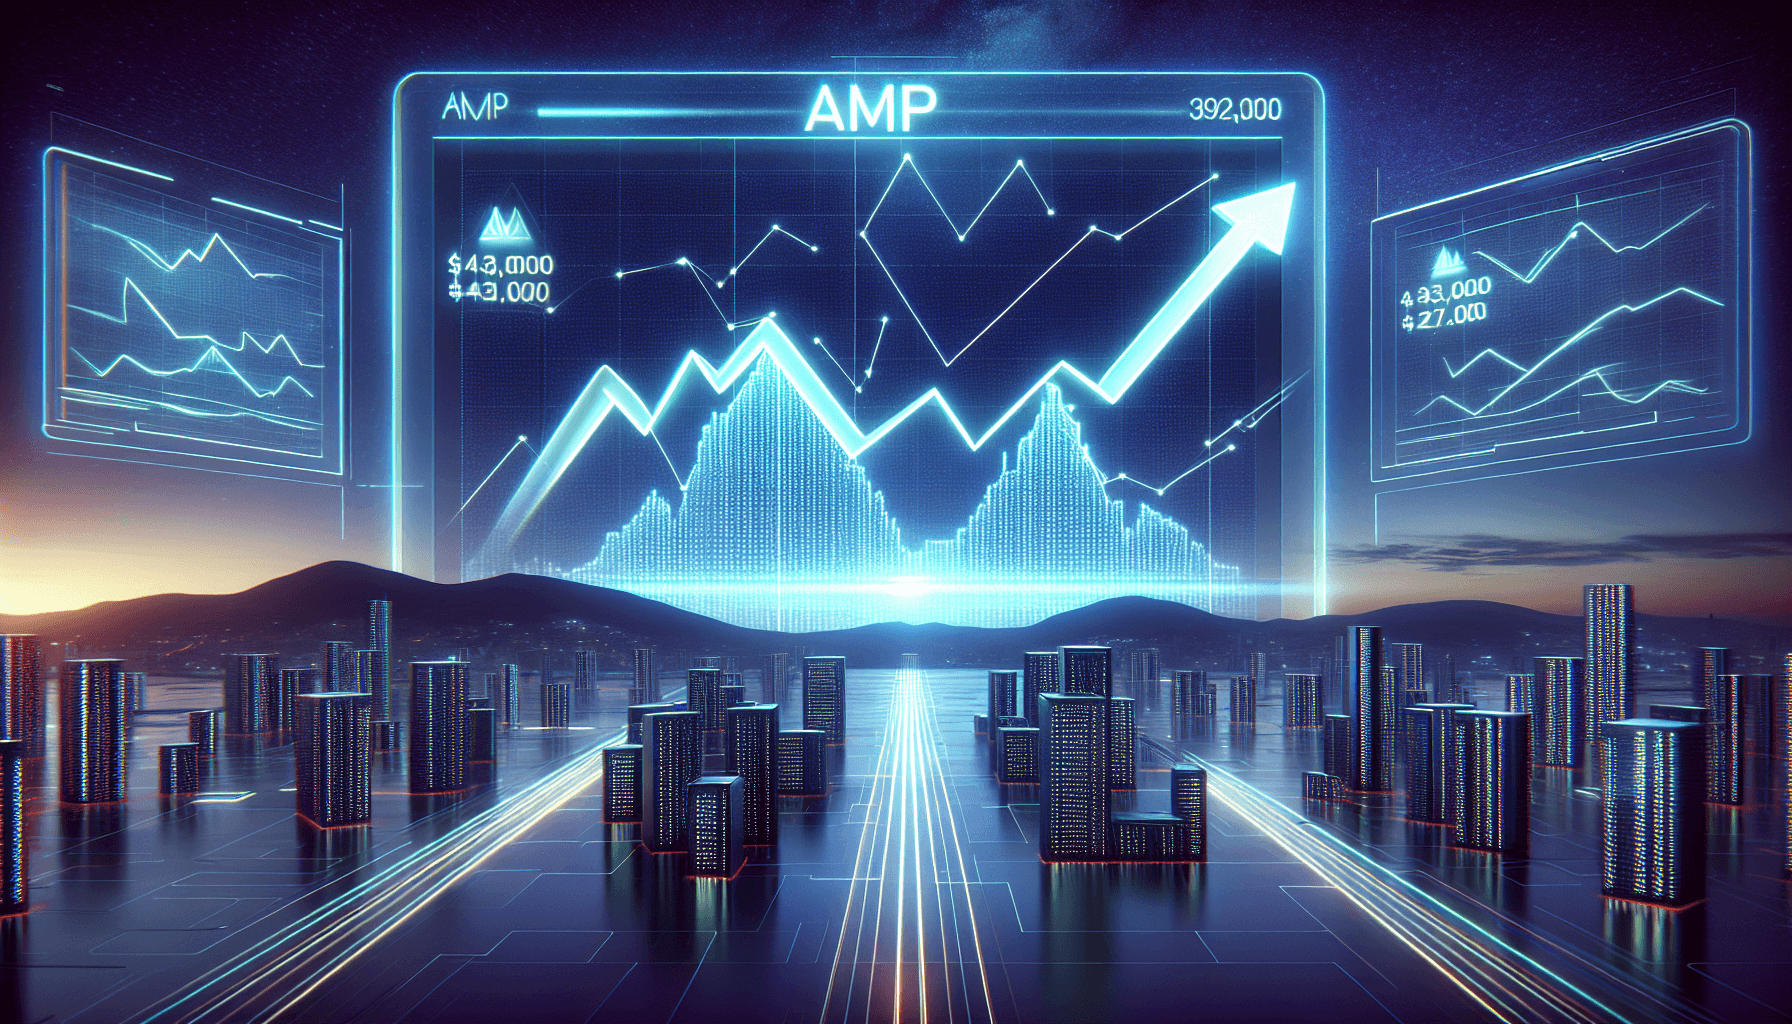 AMP Valuation Outlook